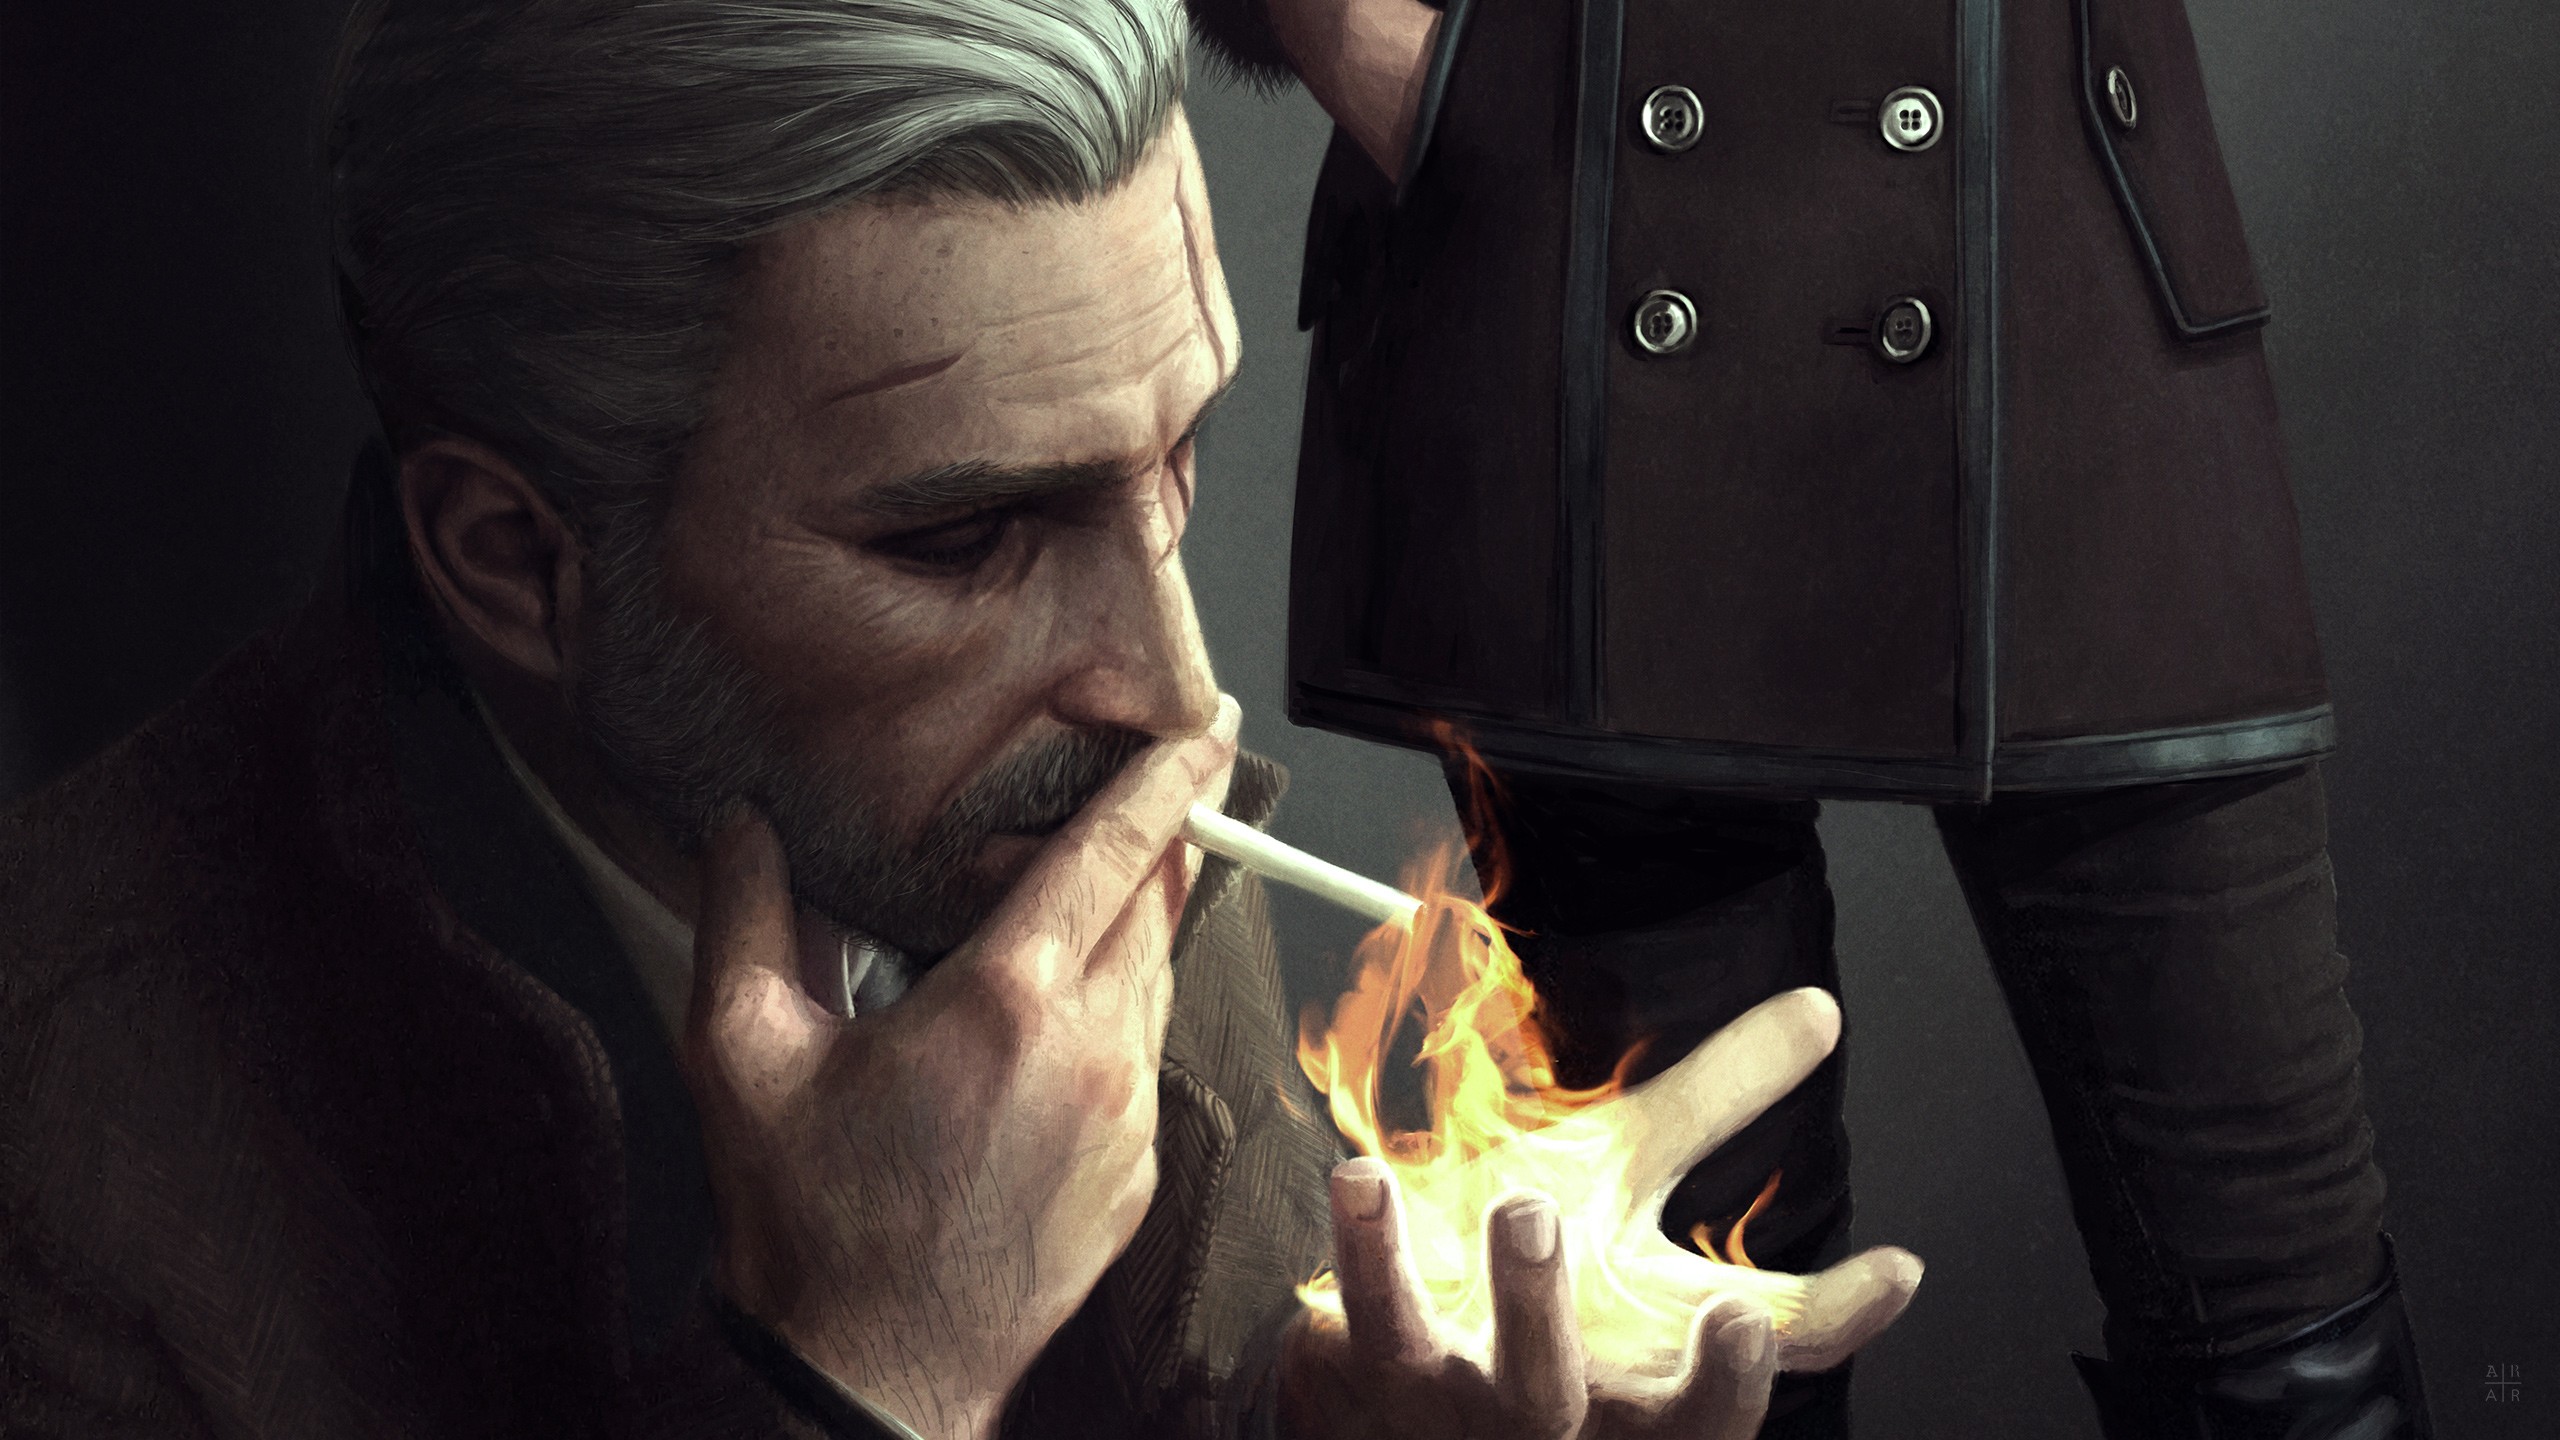 General 2560x1440 fire Geralt of Rivia The Witcher